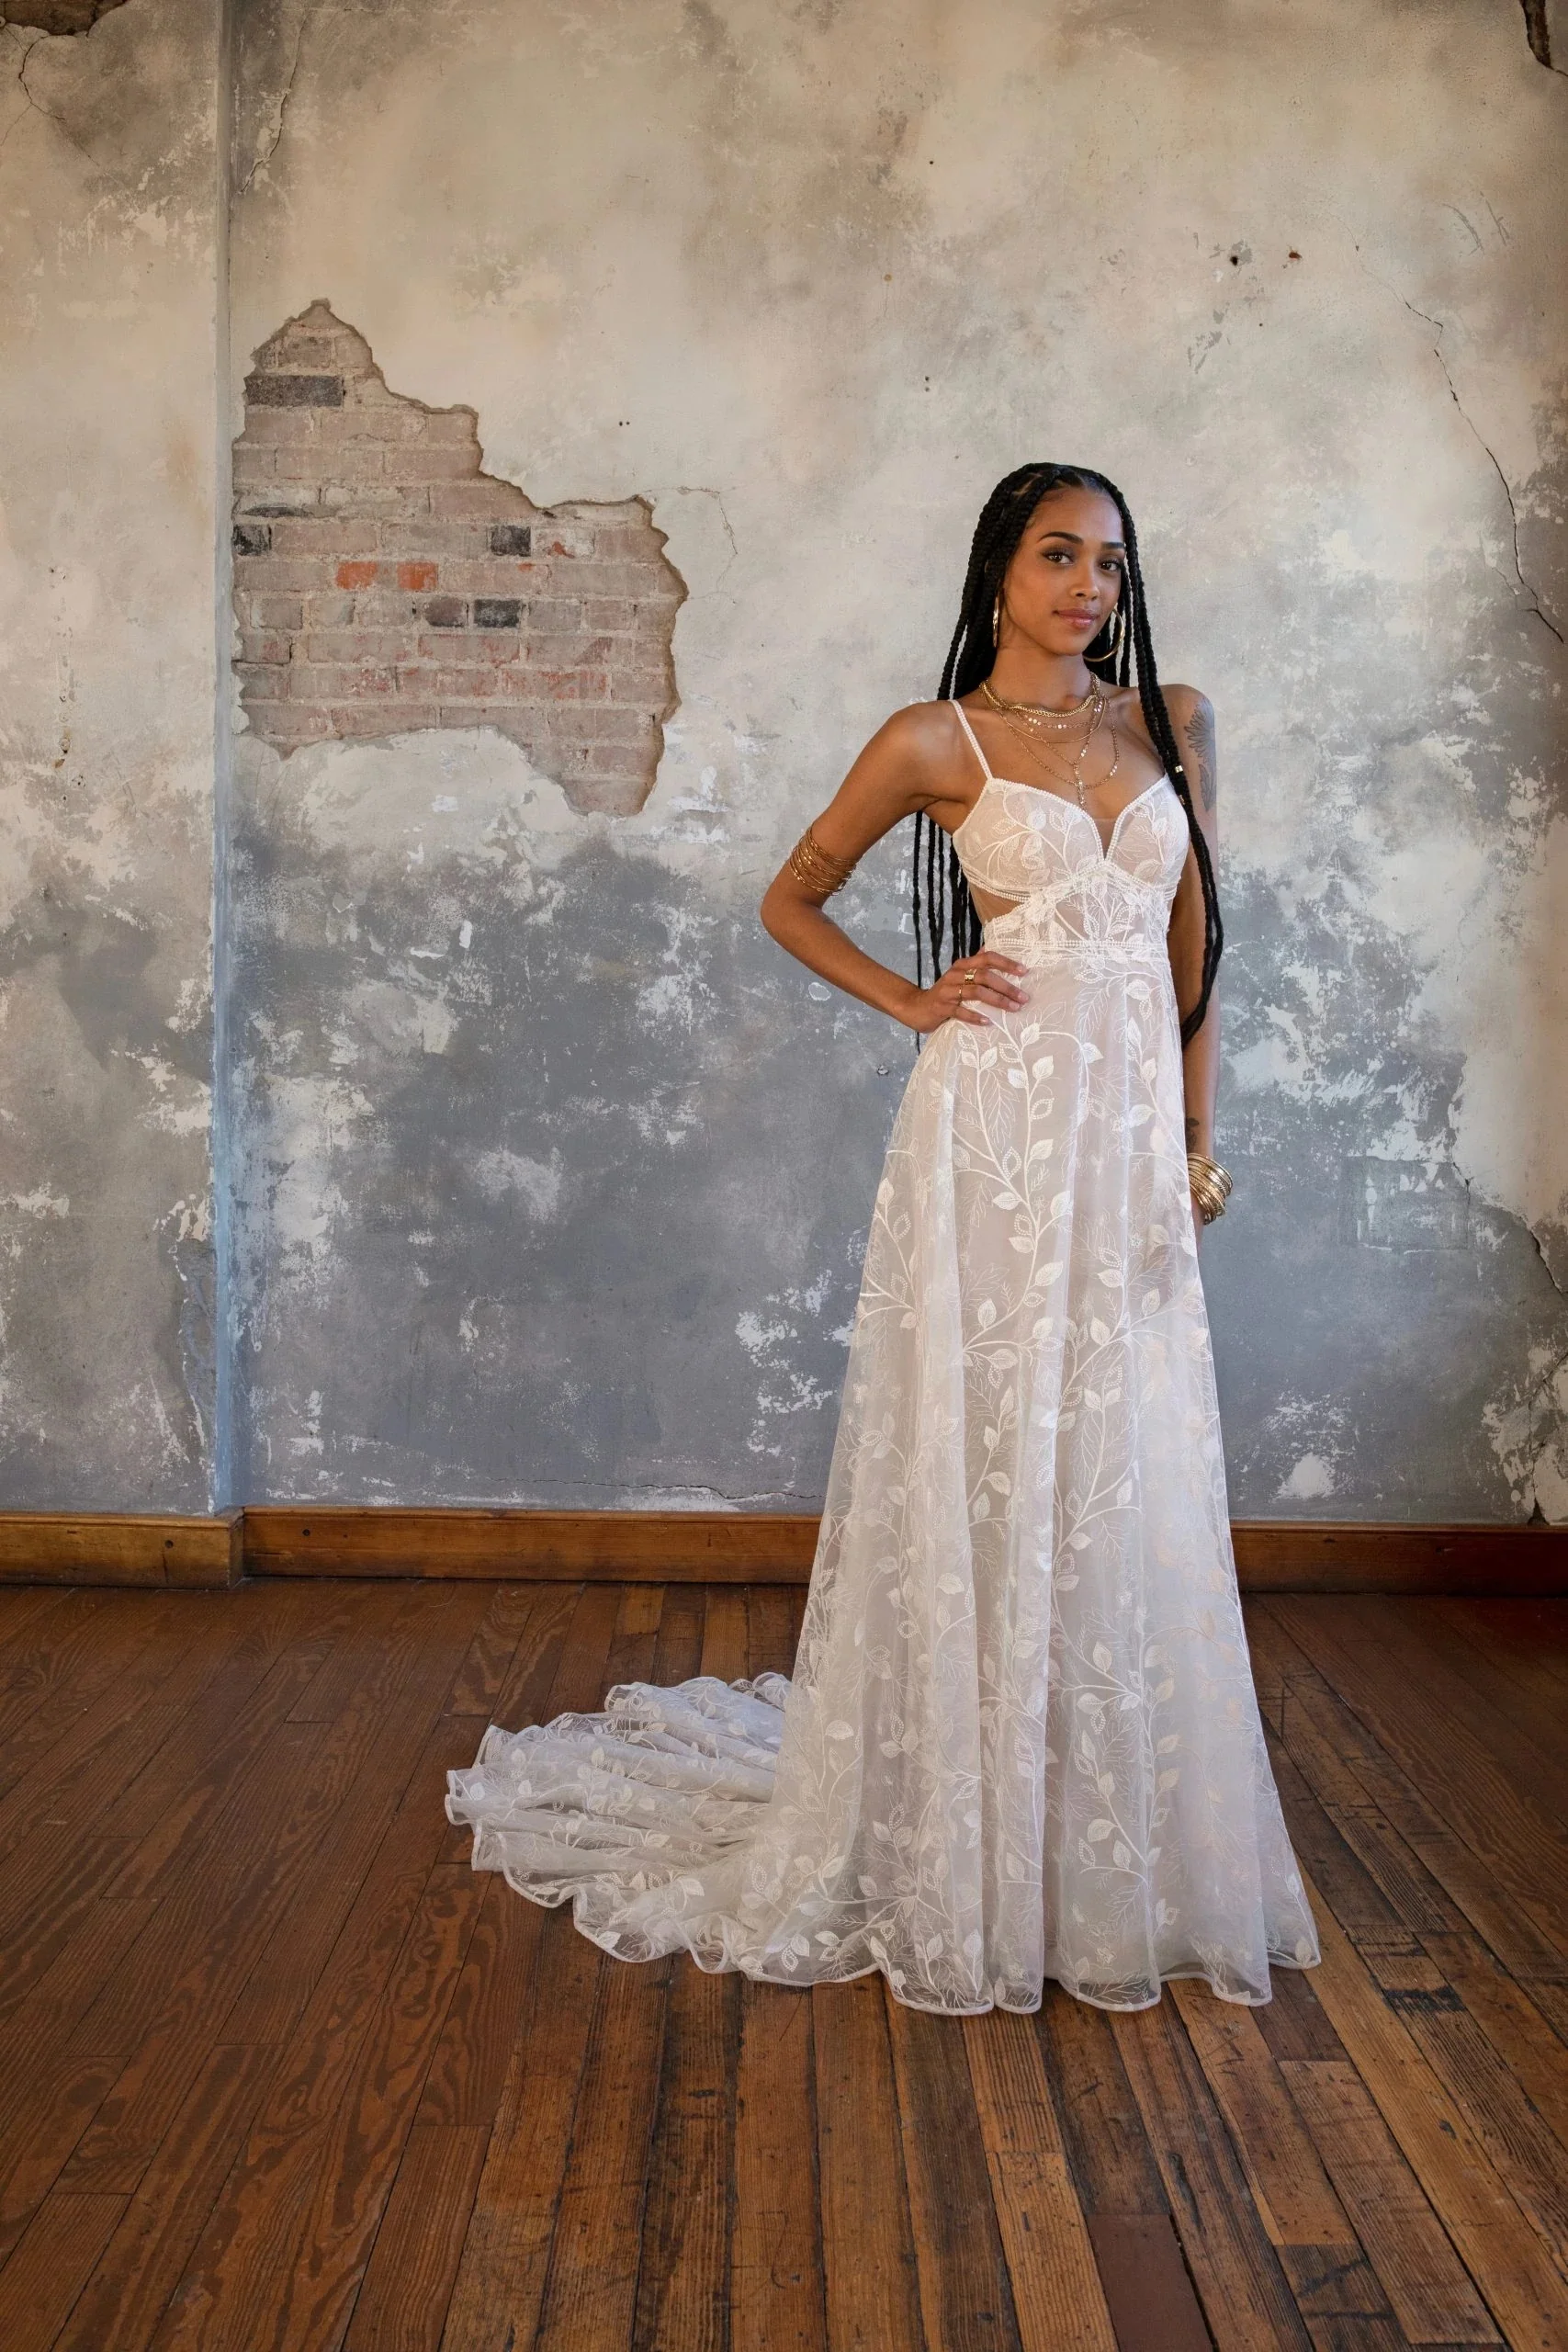 Henna lace wedding dress, by All Who Wander.